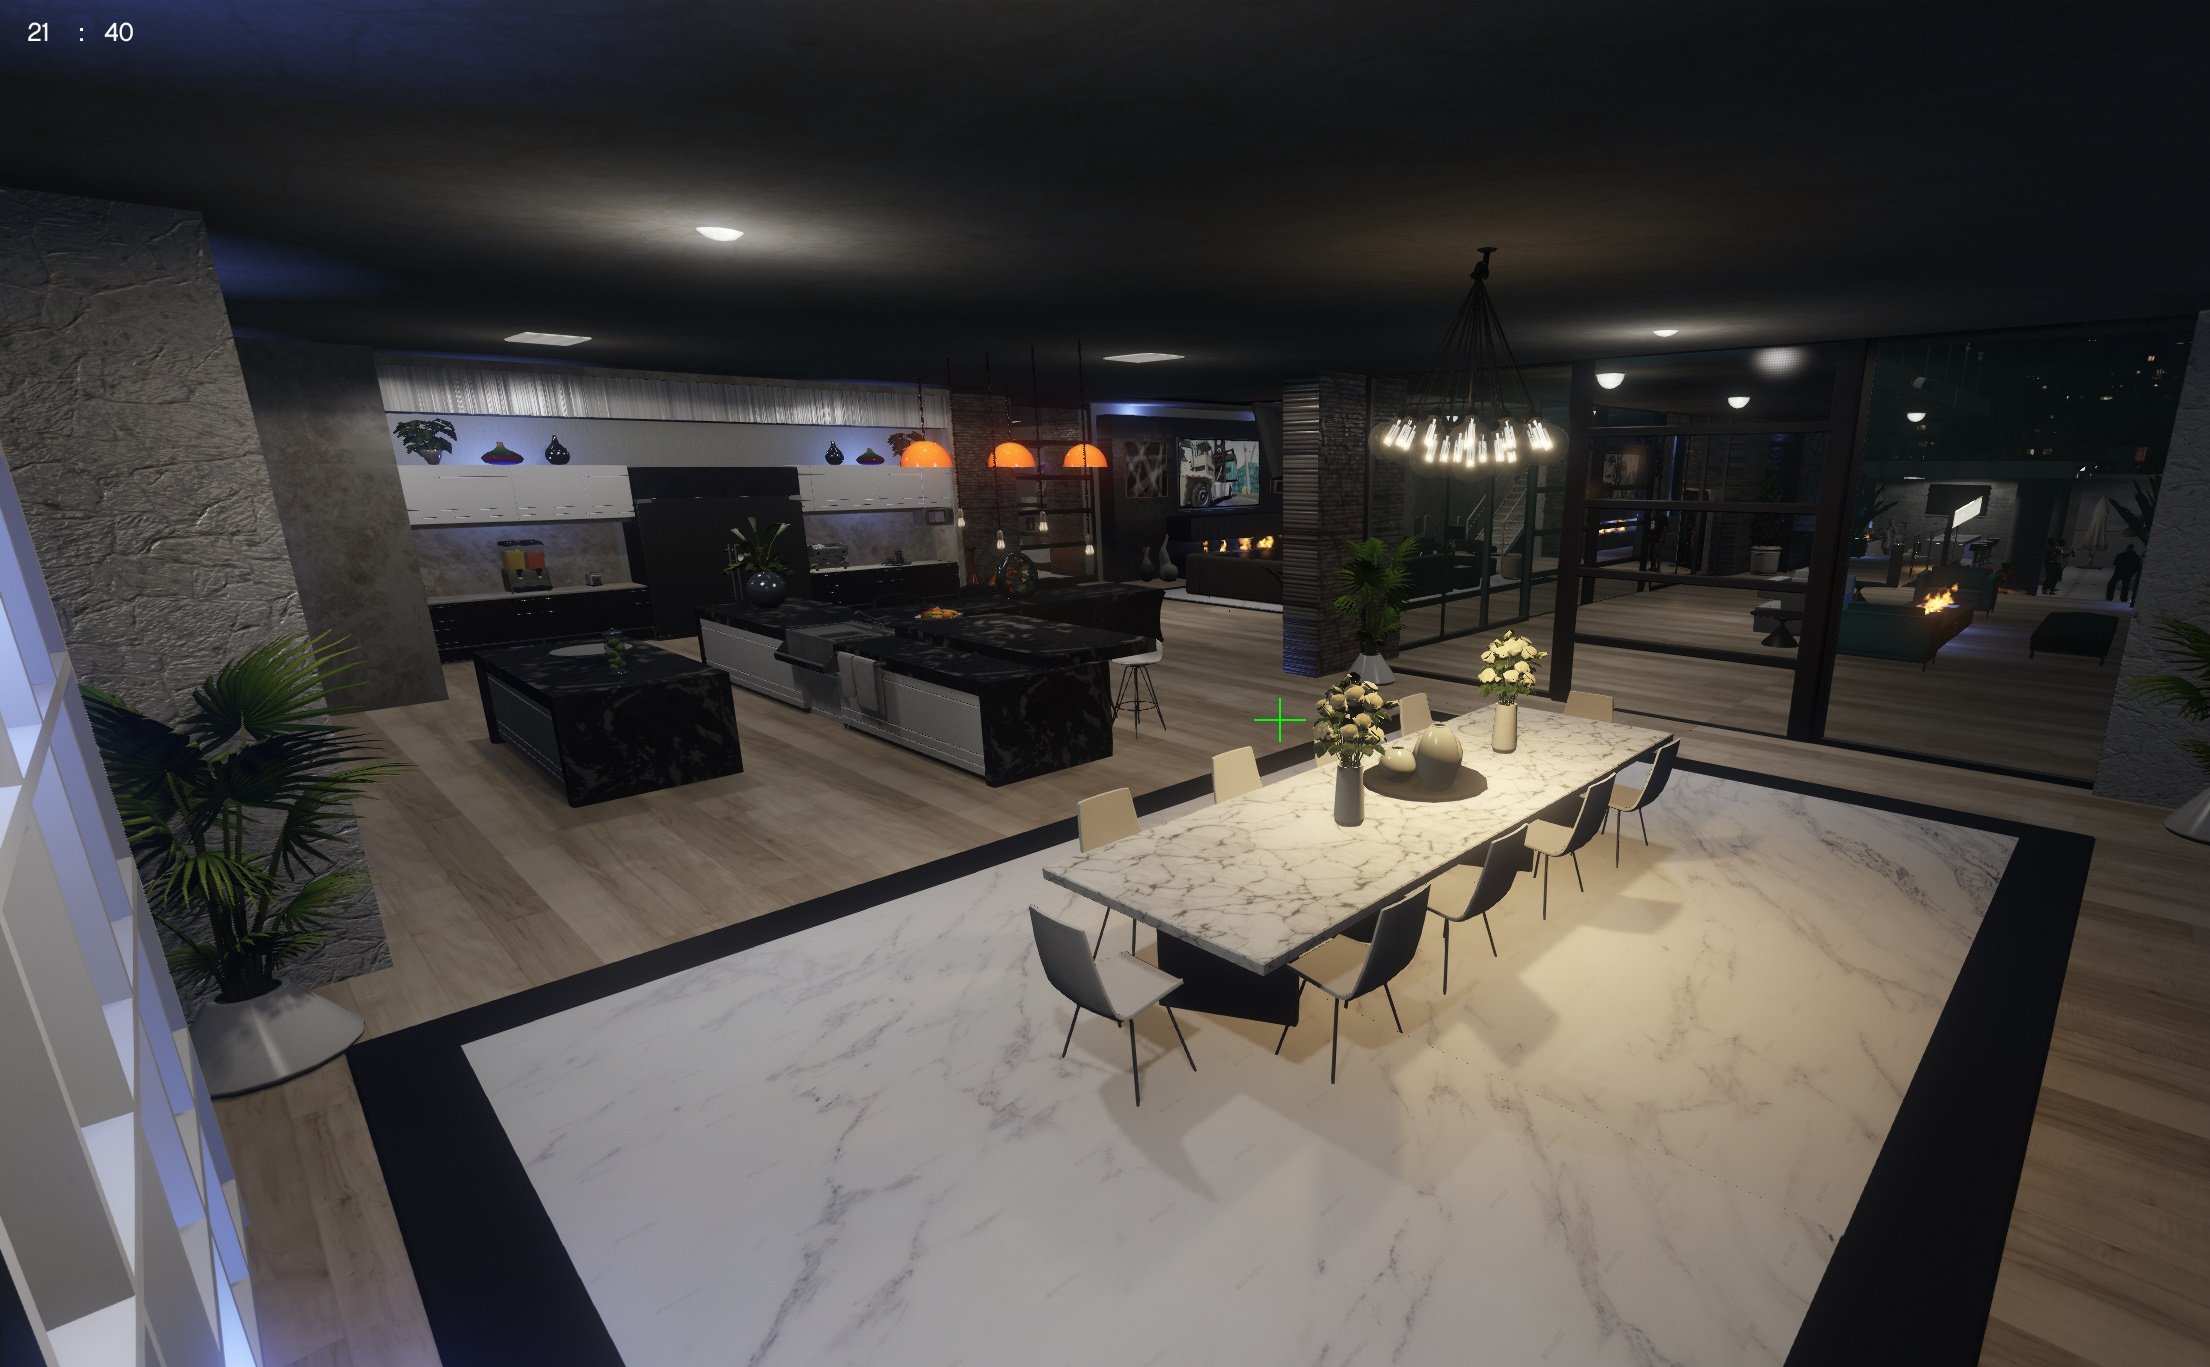 5 best GTA 5 PC mods that add new buildings and furniture